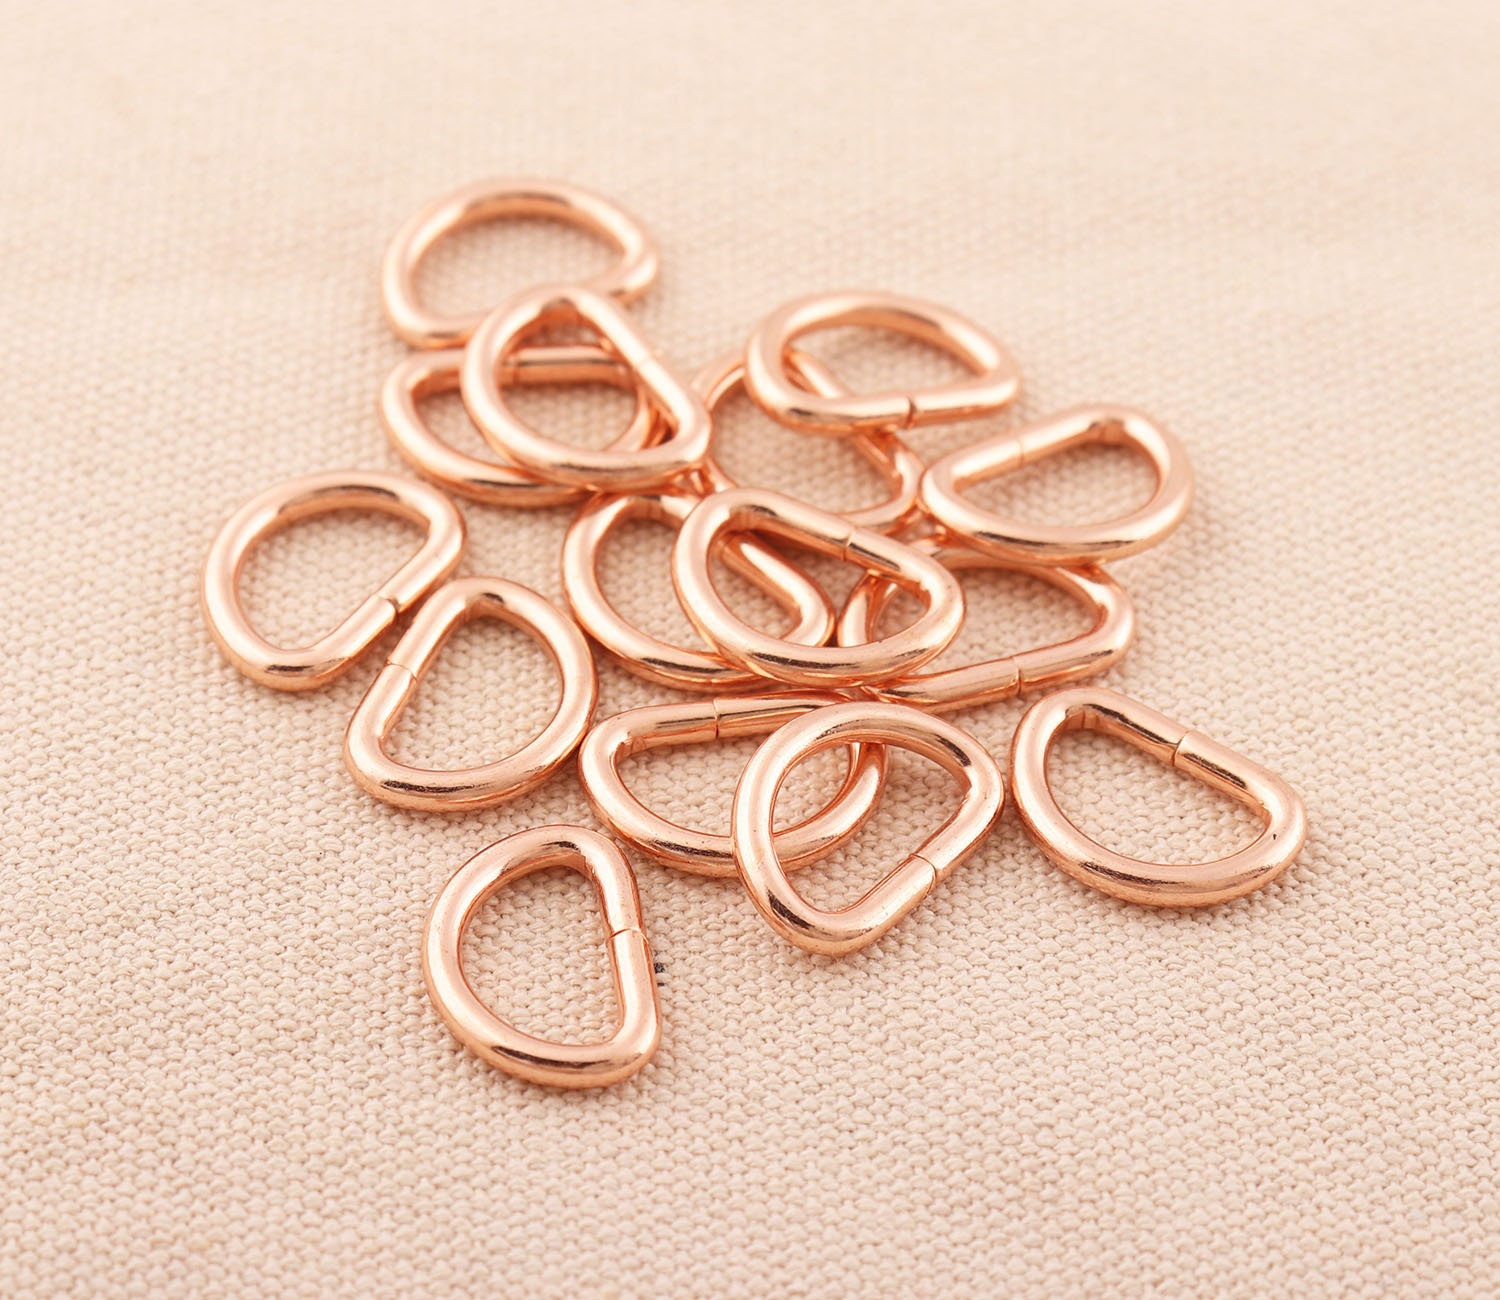  D Rings for Purse Hardware for Bag Making, 12 PCS